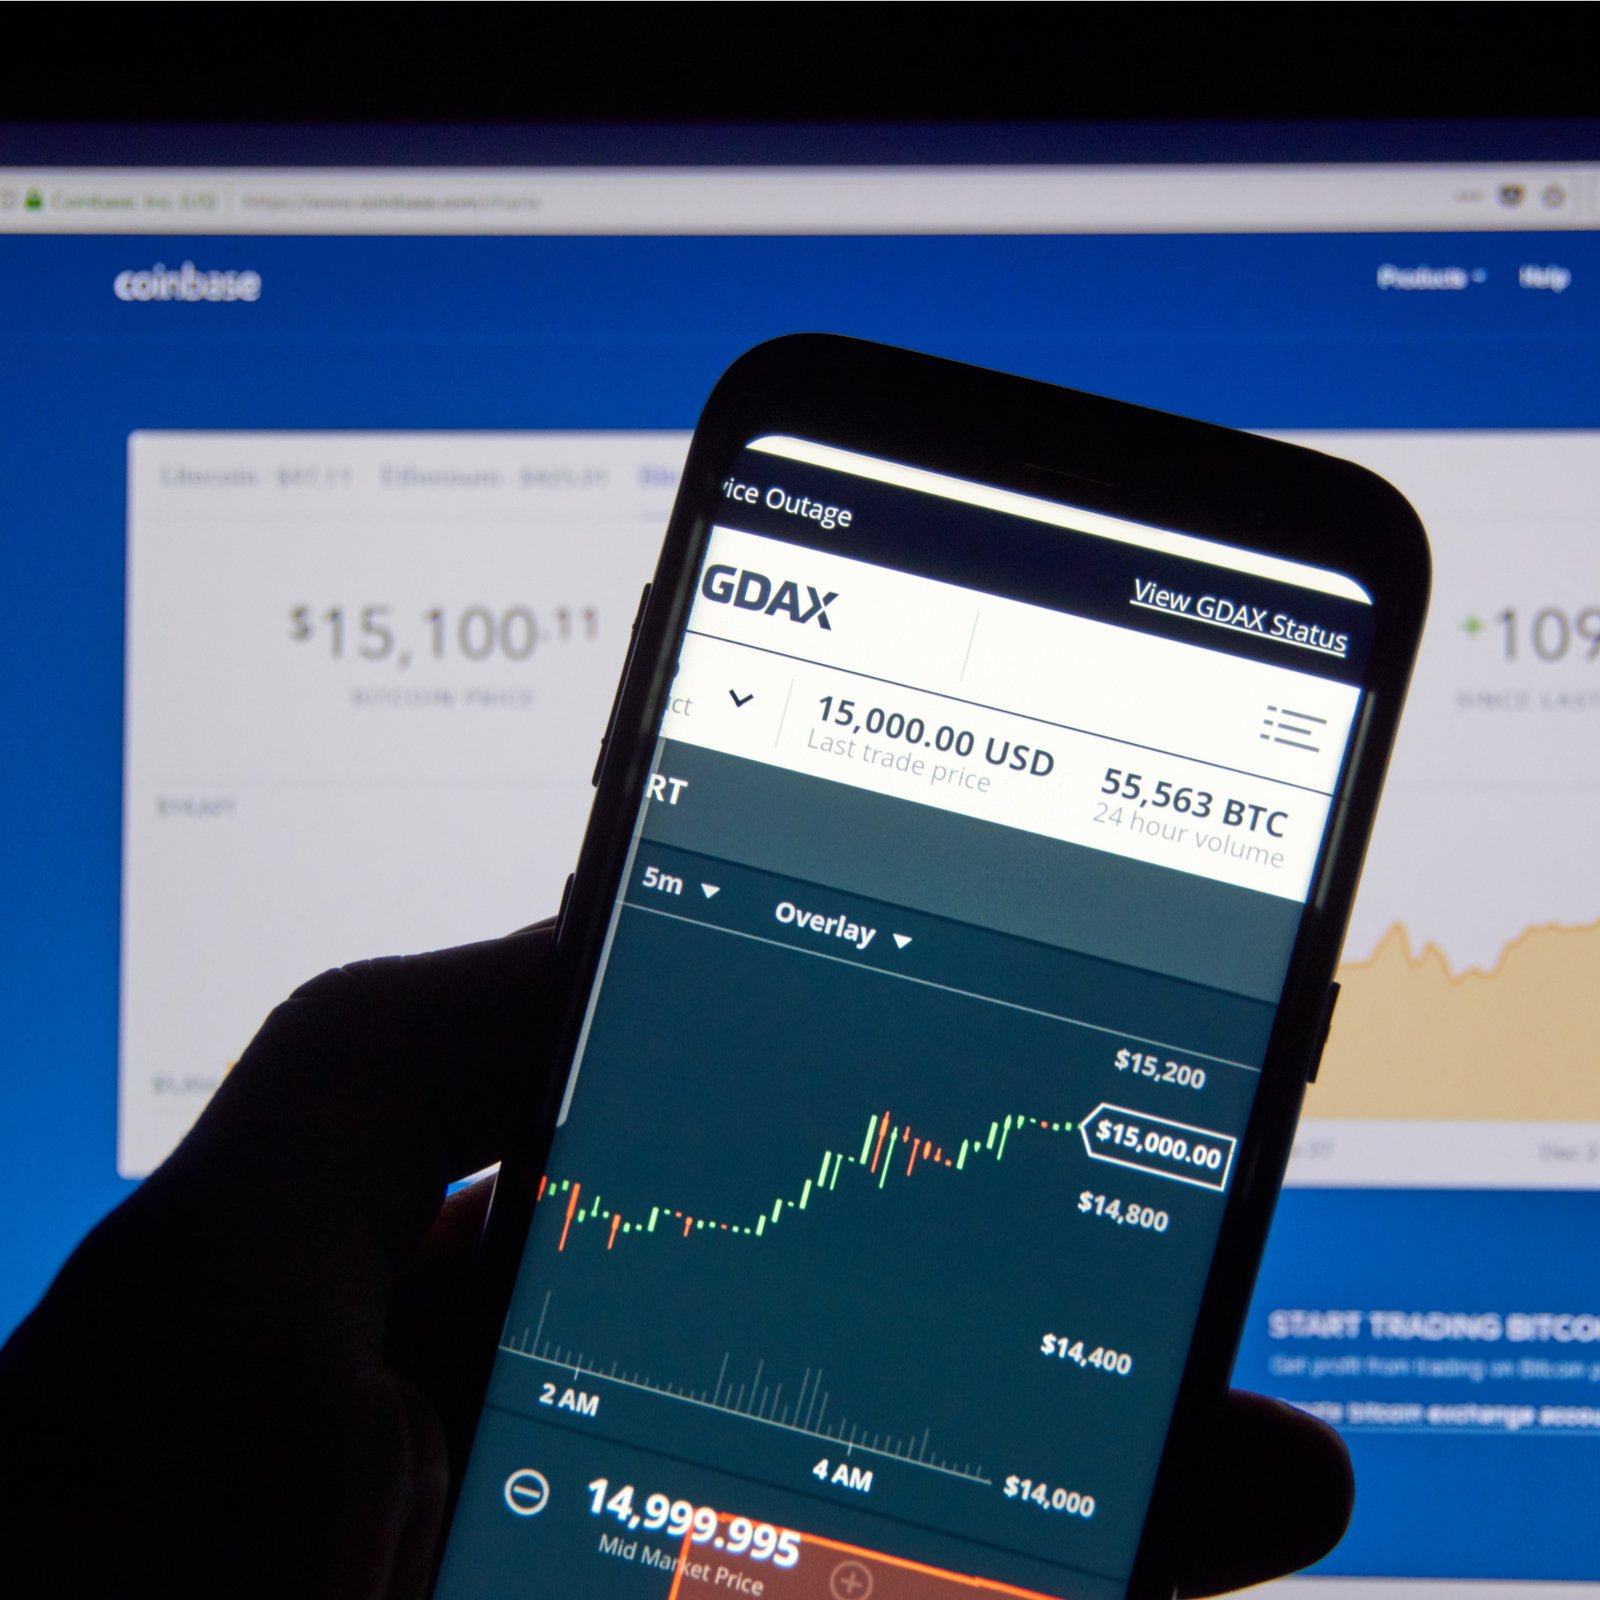 Can you buy btc on gdax with usd bitcoin perspective